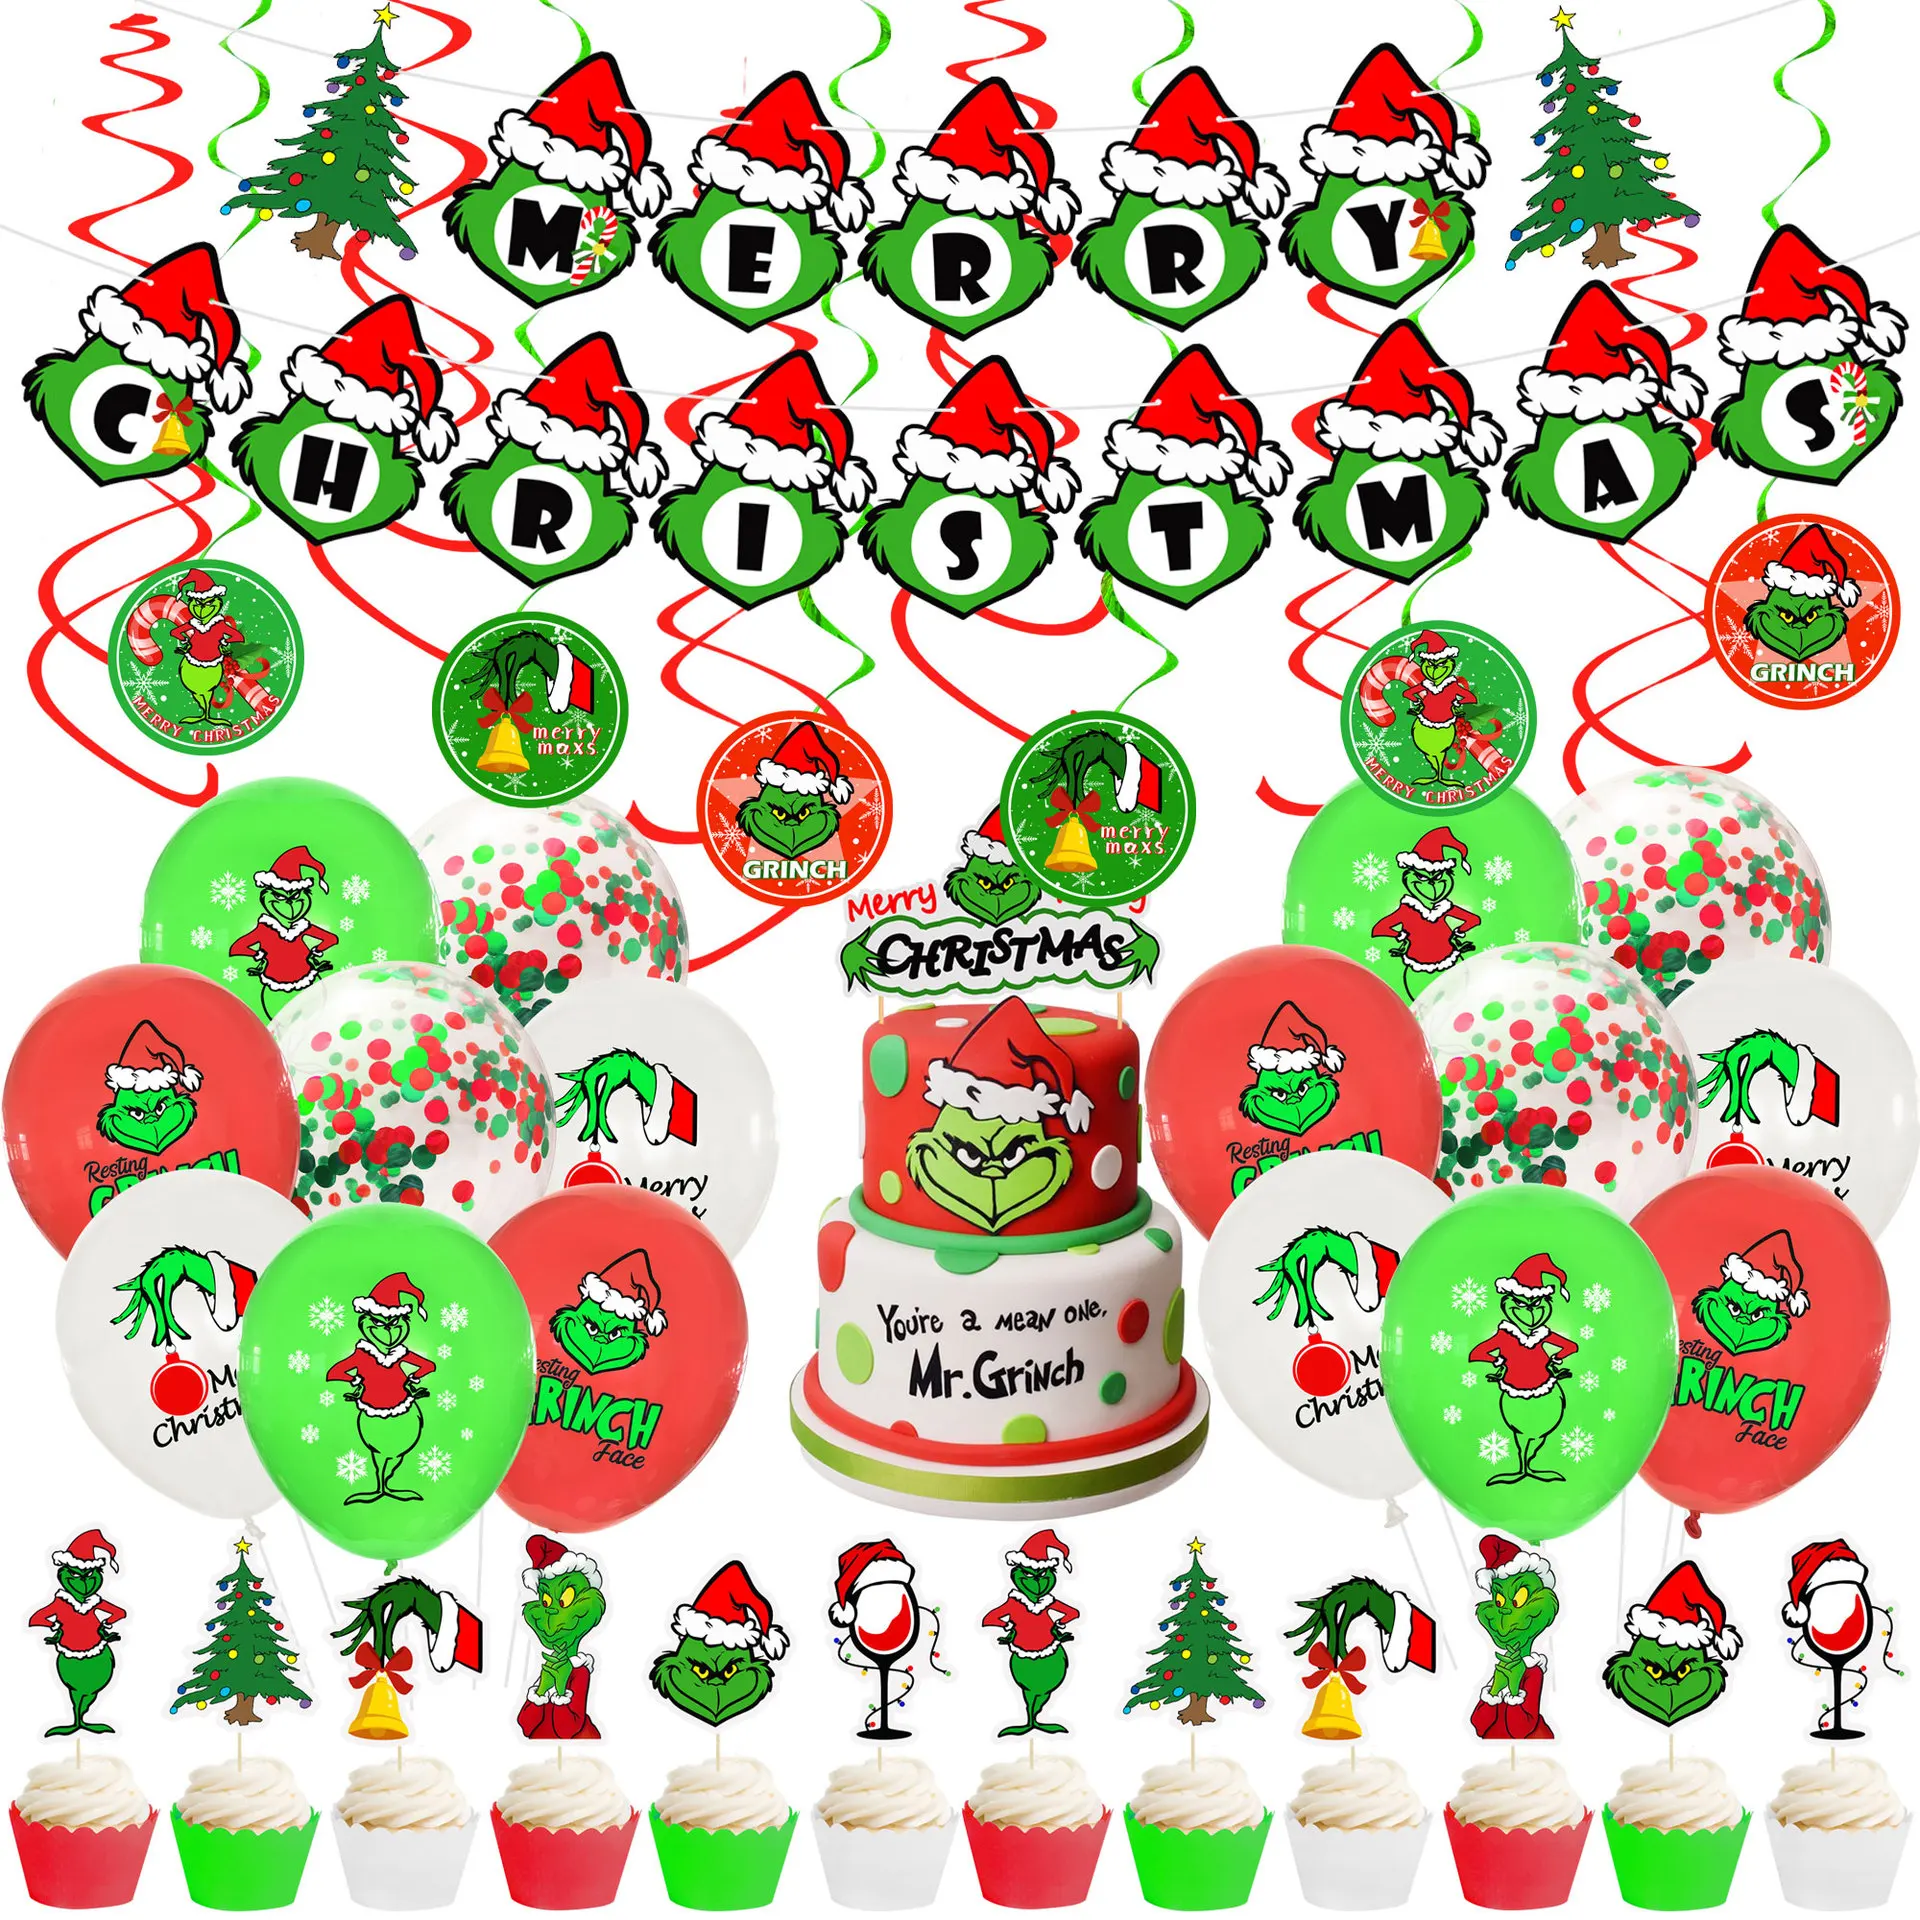 Merry Christmas Grinch Stole Balloons Banner Decoration Party Supllies New Year 2021 Navidad Party Christmas Decoration Balls